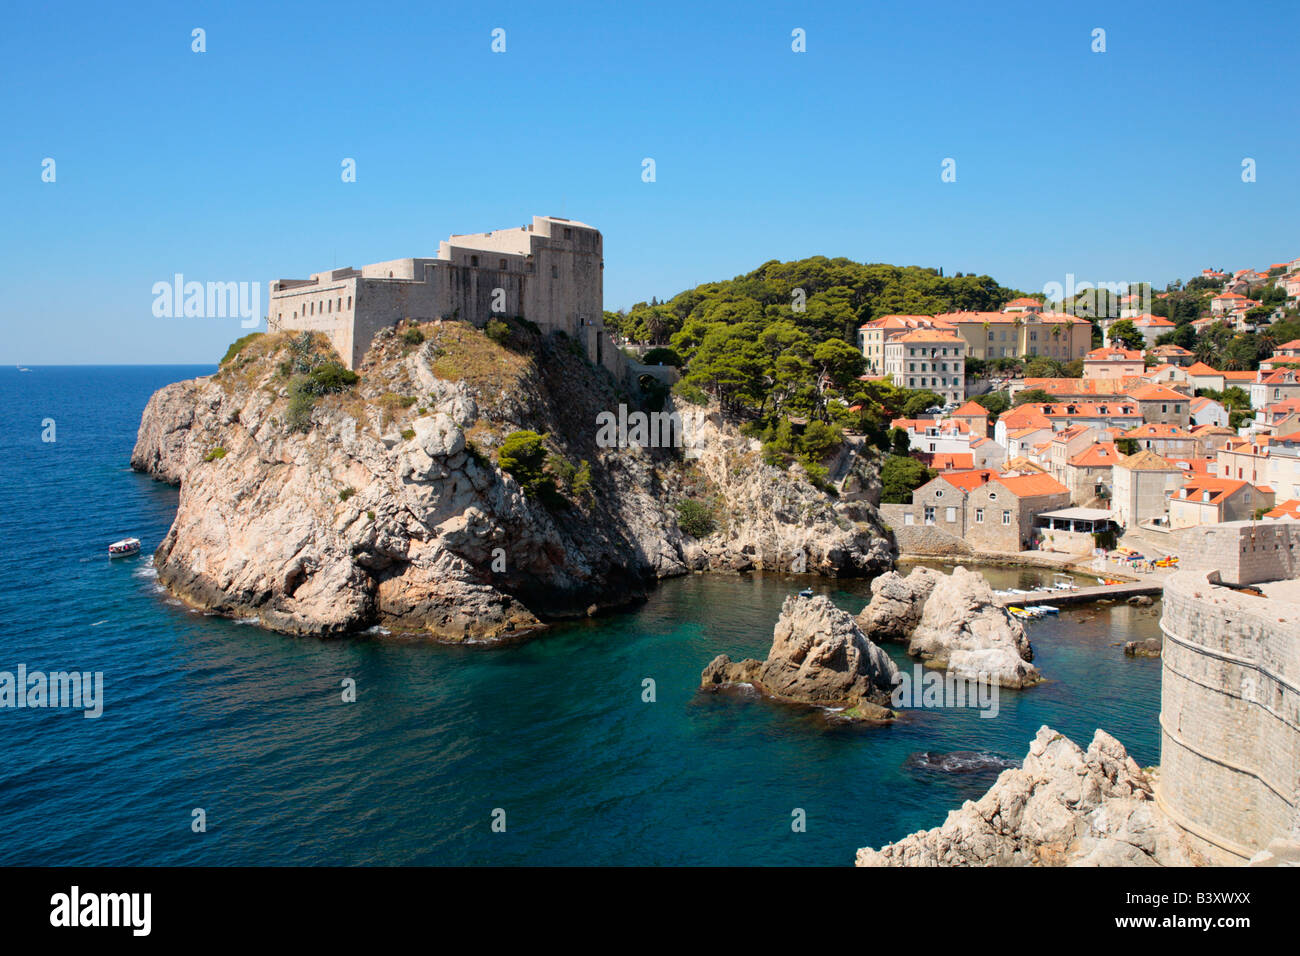 Fort St. Lawrence beside the old town of Dubrovnik, Republic of Croatia, Eastern Europe Stock Photo